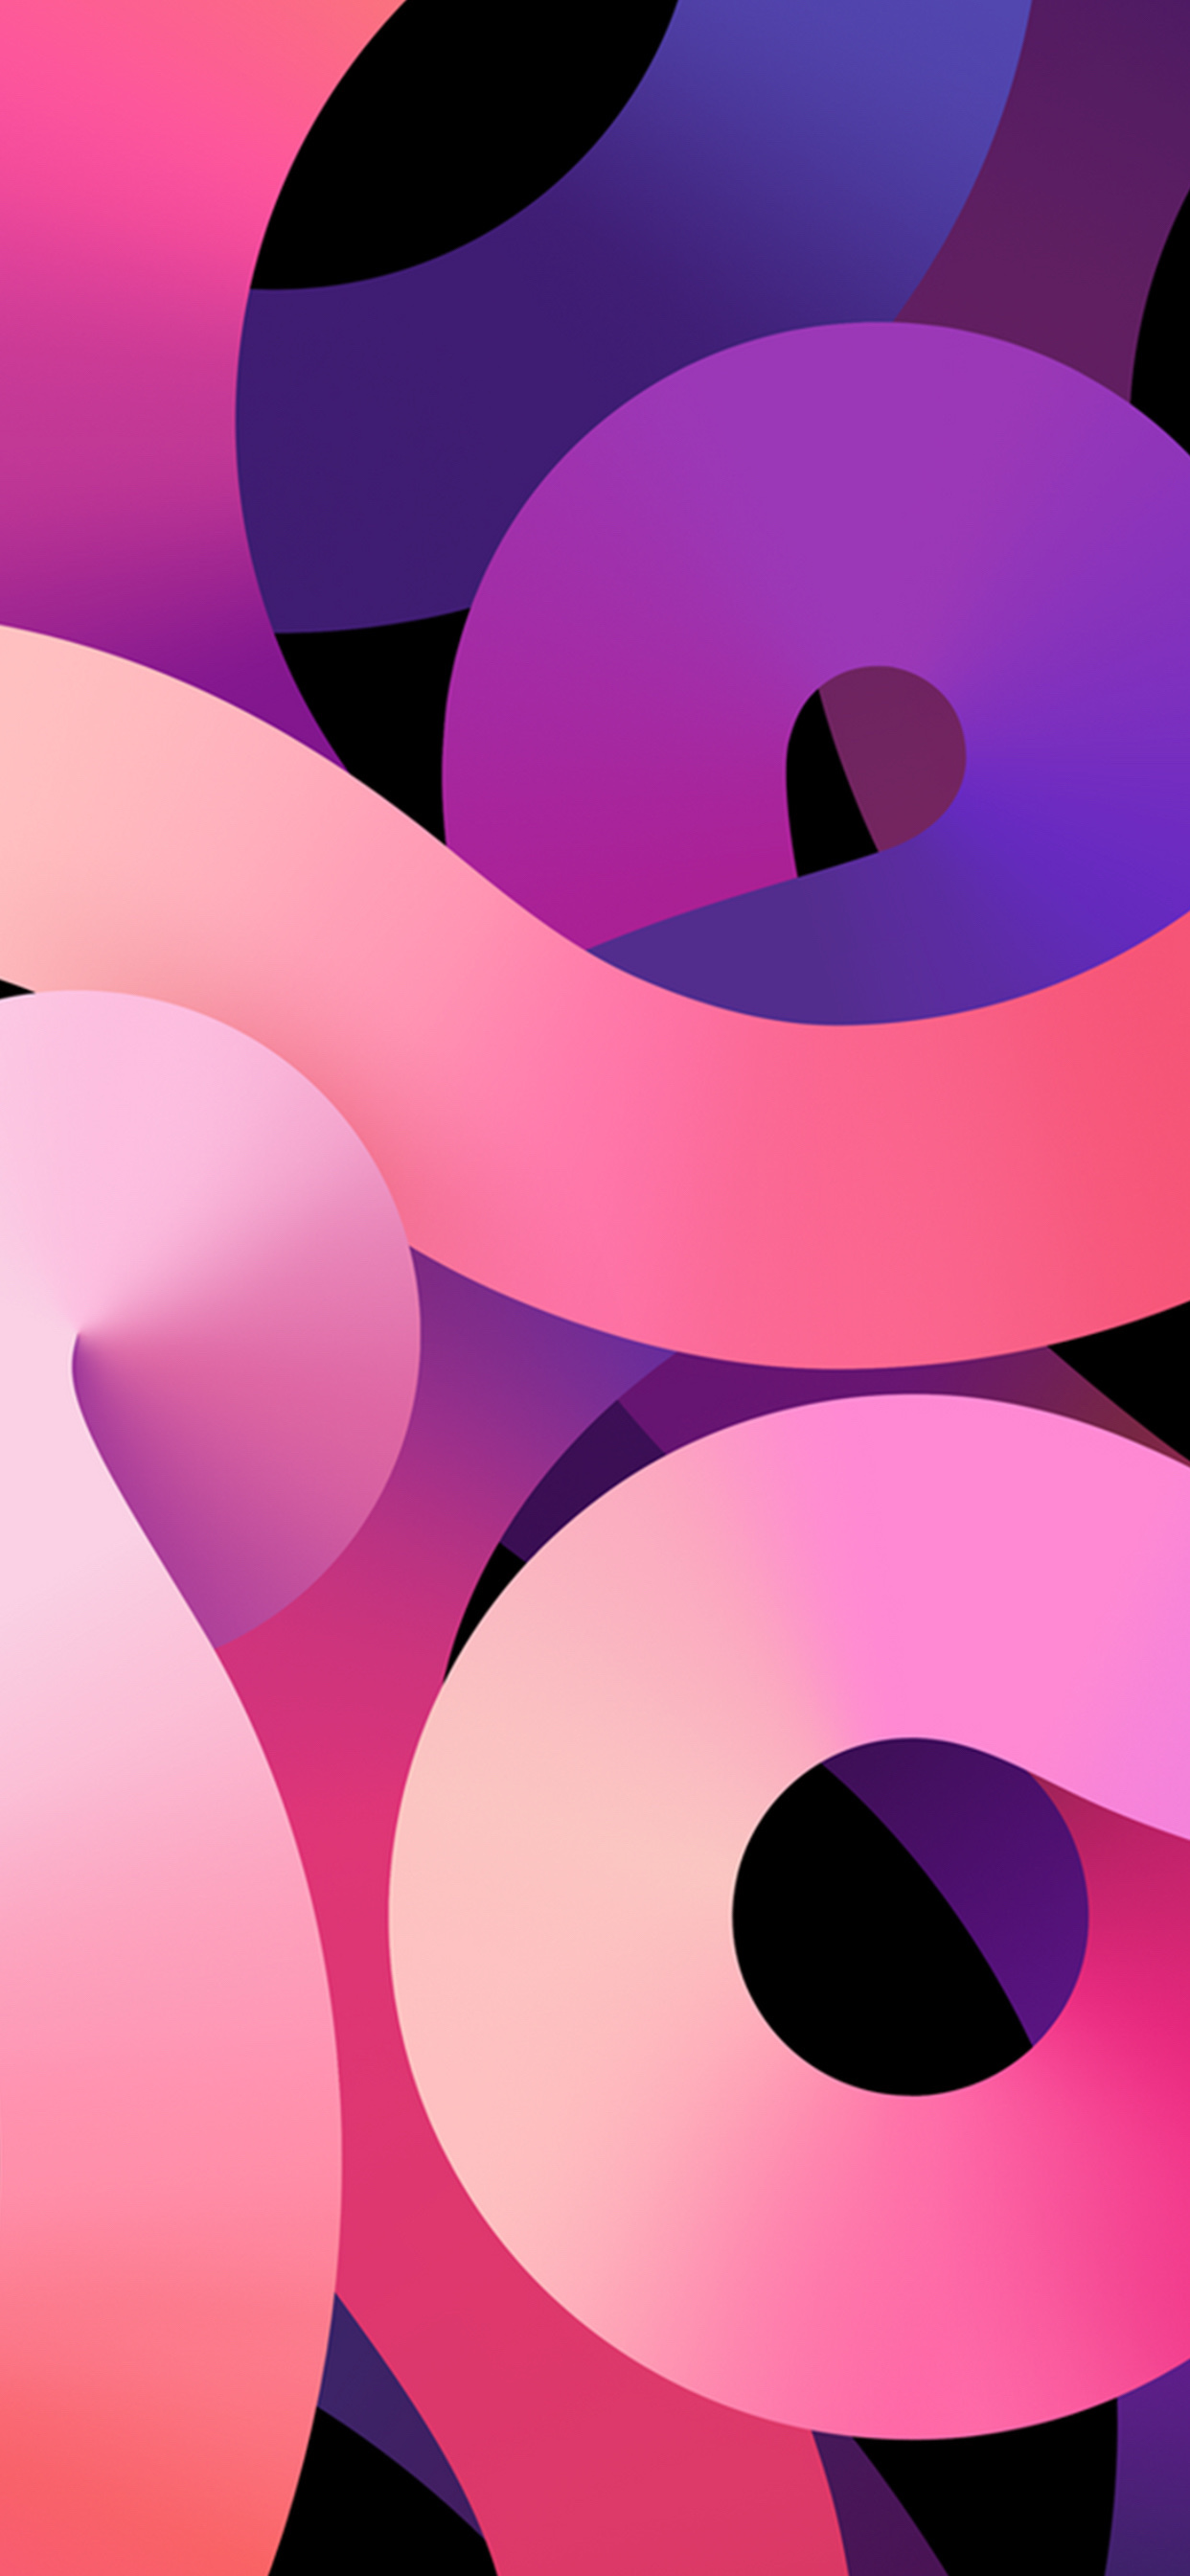 Iphone Ipad And Desktop Wallpapers Inspired By The New Ipad Air